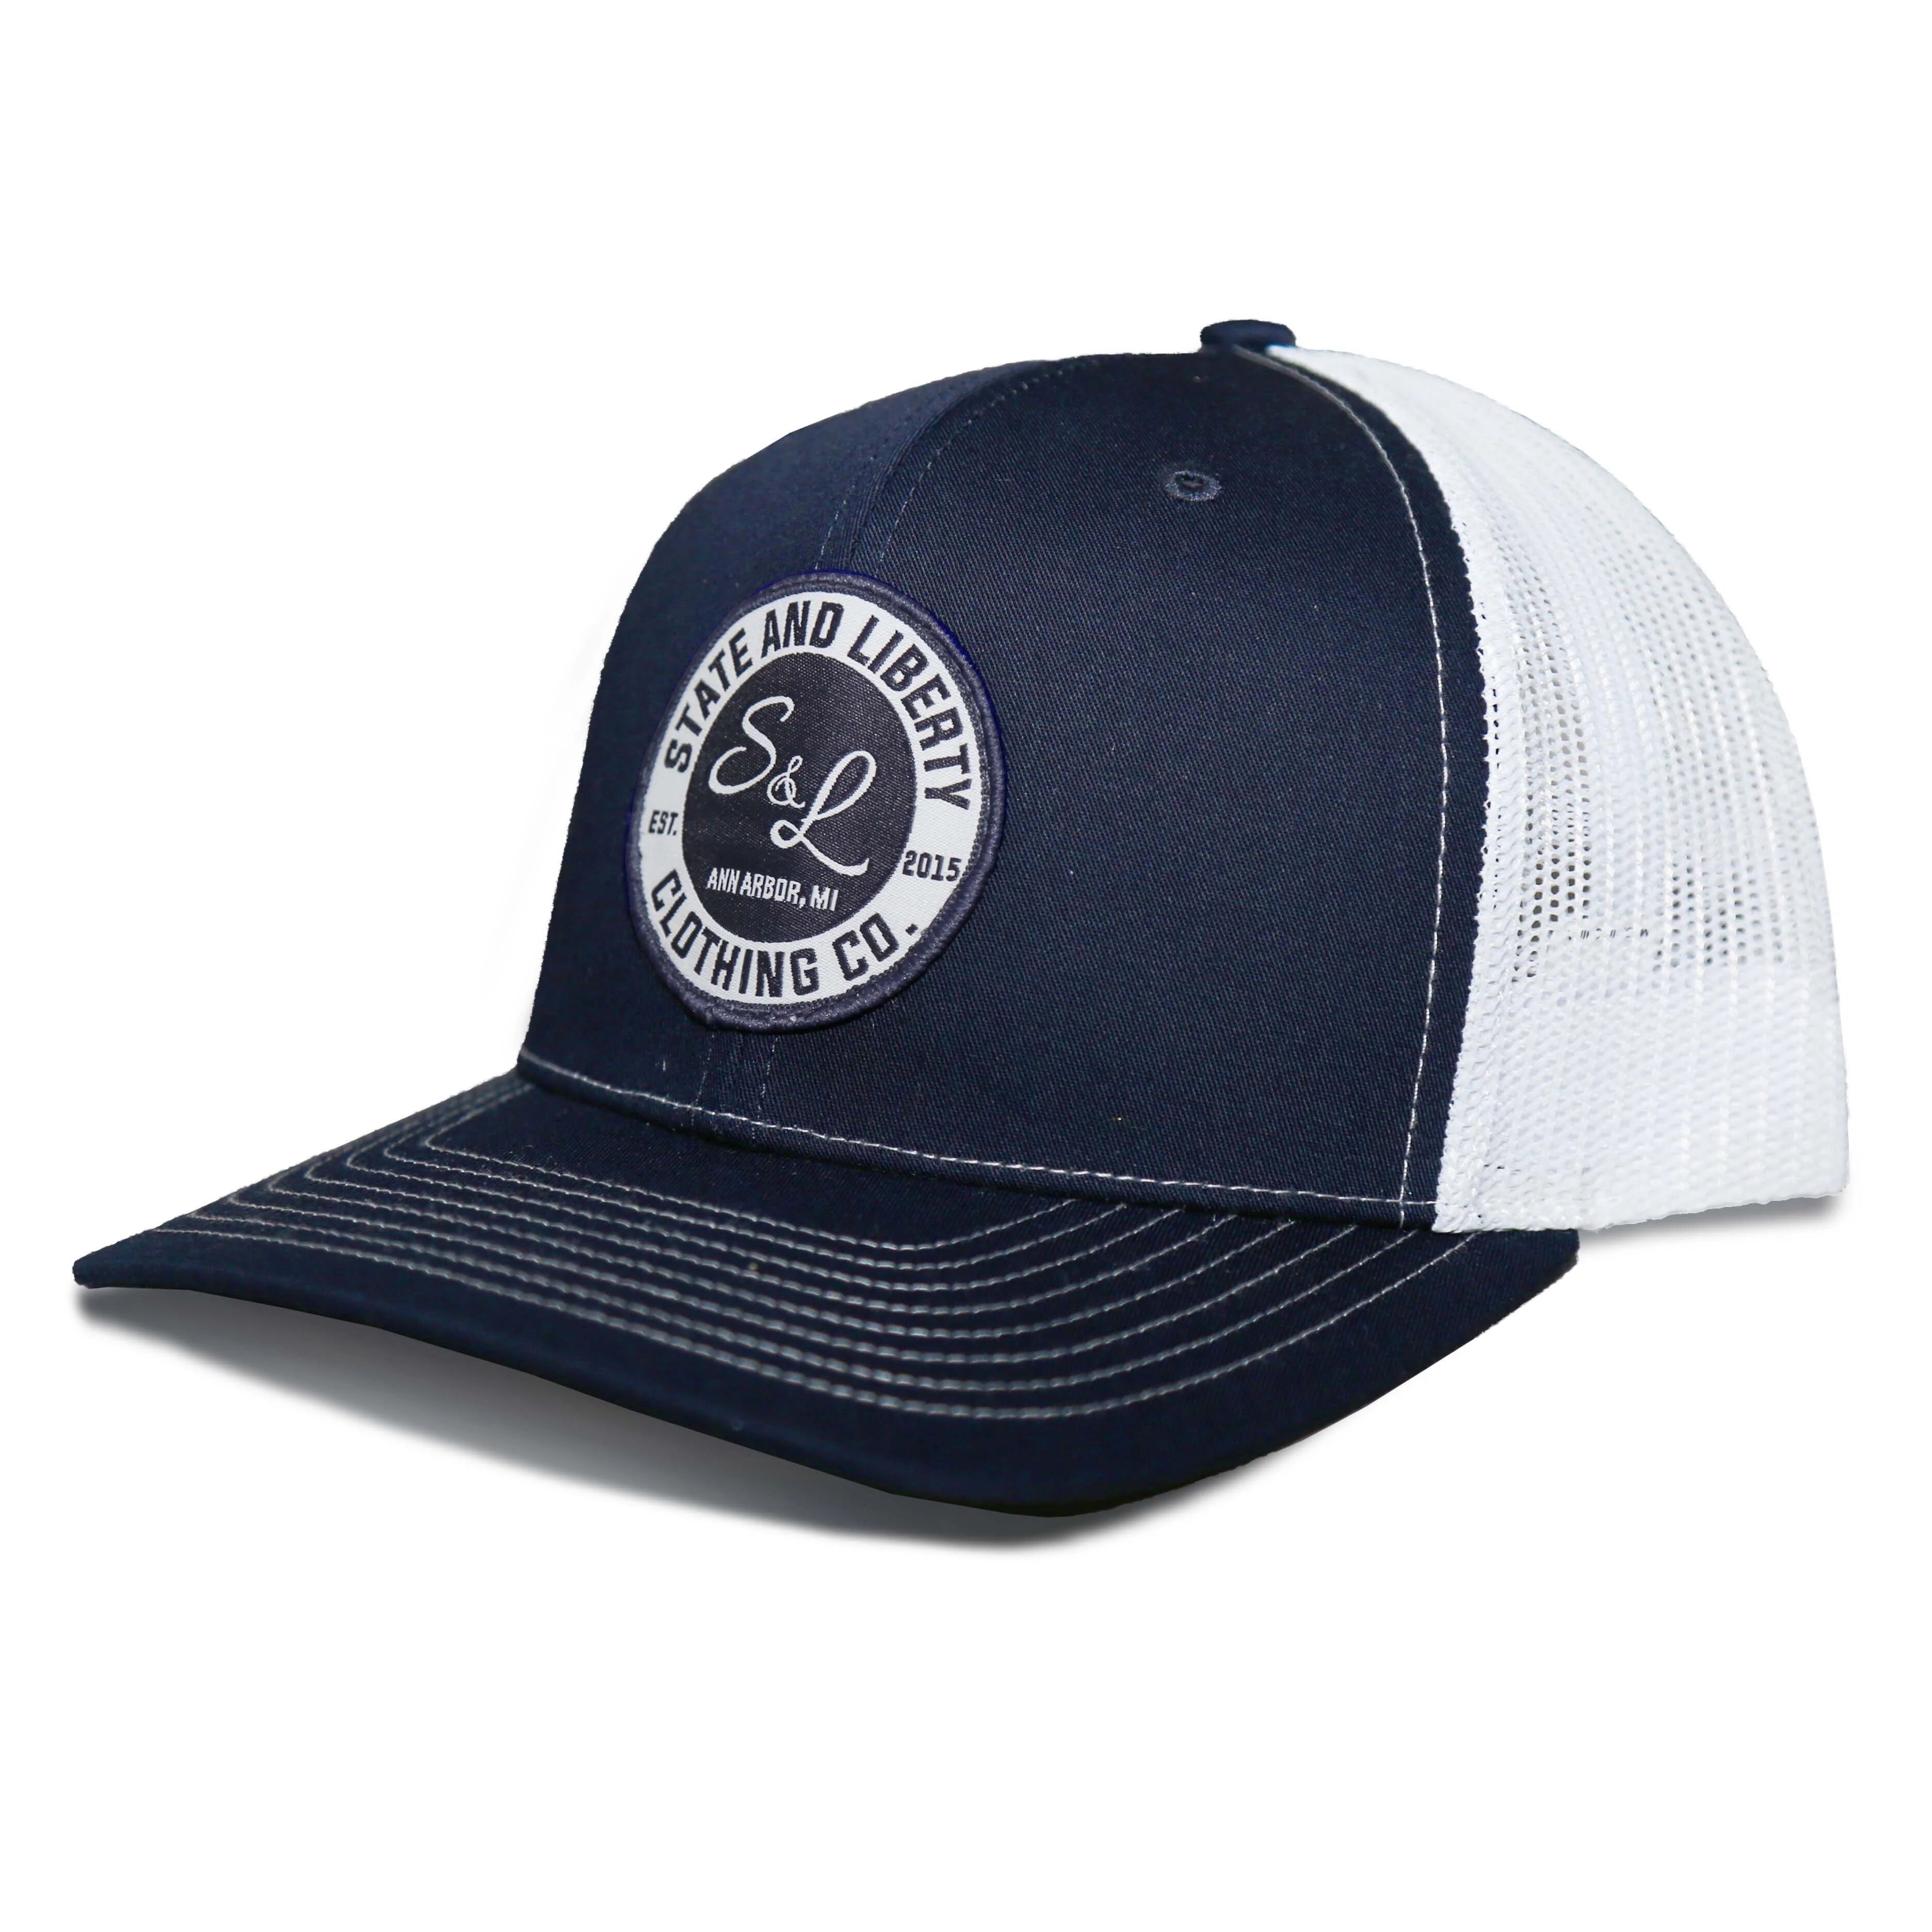 StateLiberty Snapback Hat (Additional Colors Available)